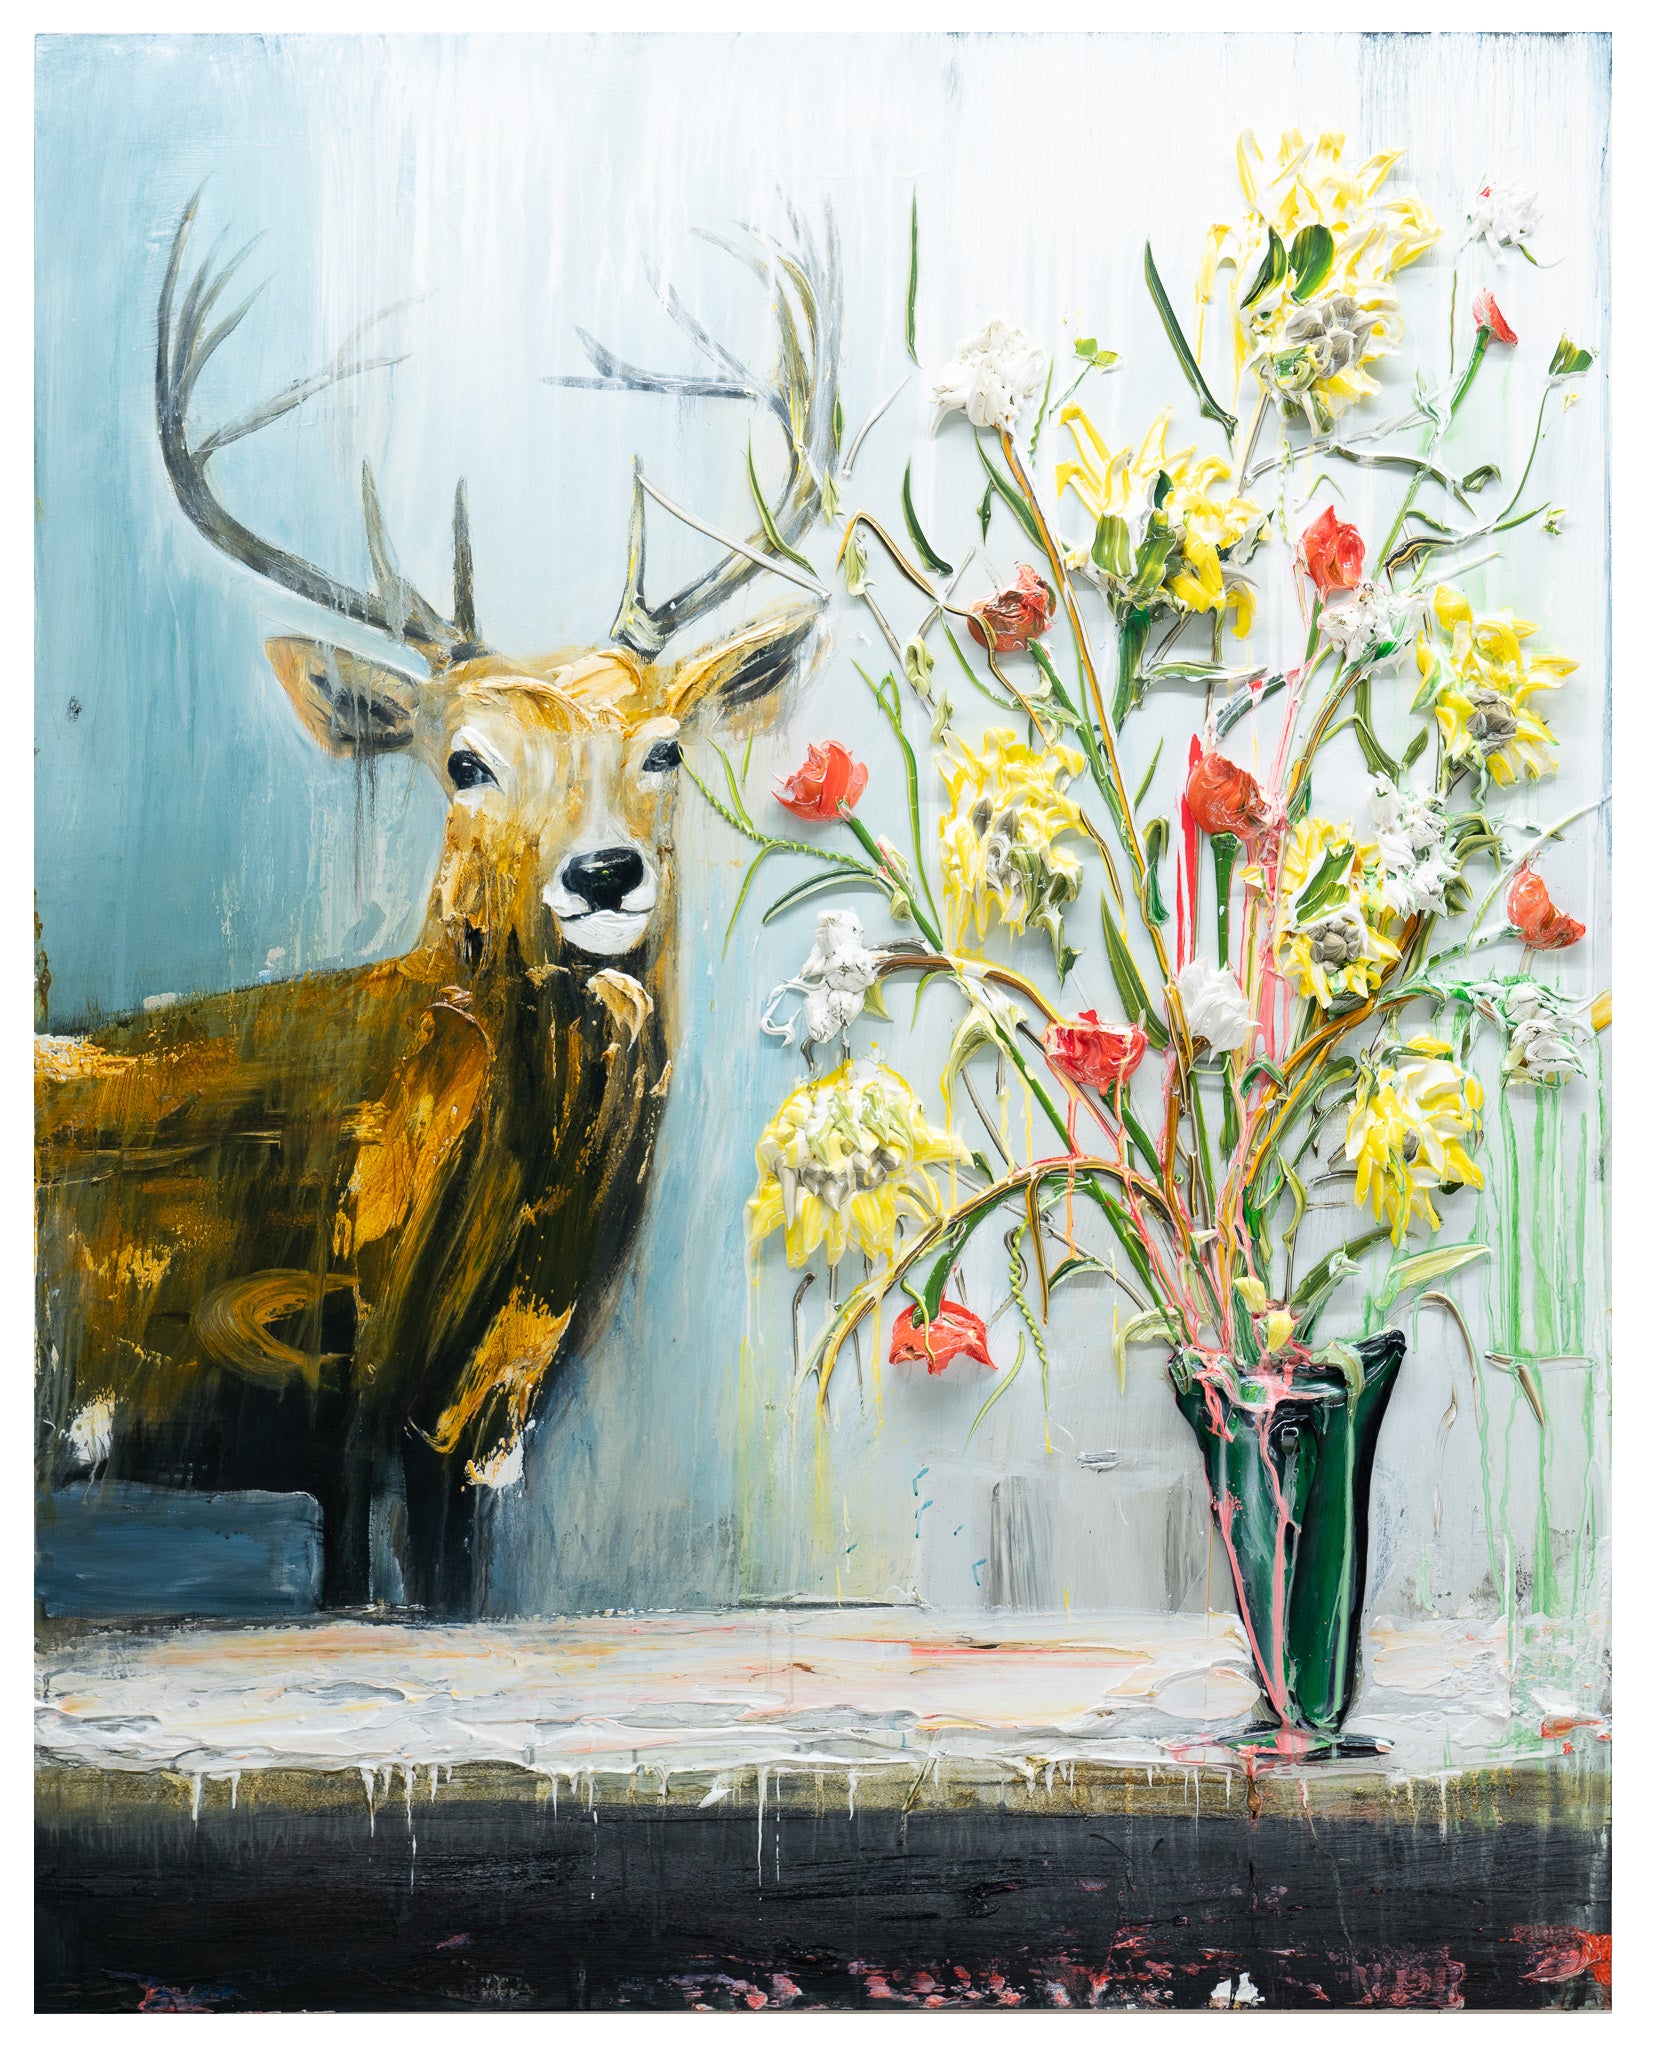 Expedition 09: Stag, 48x60